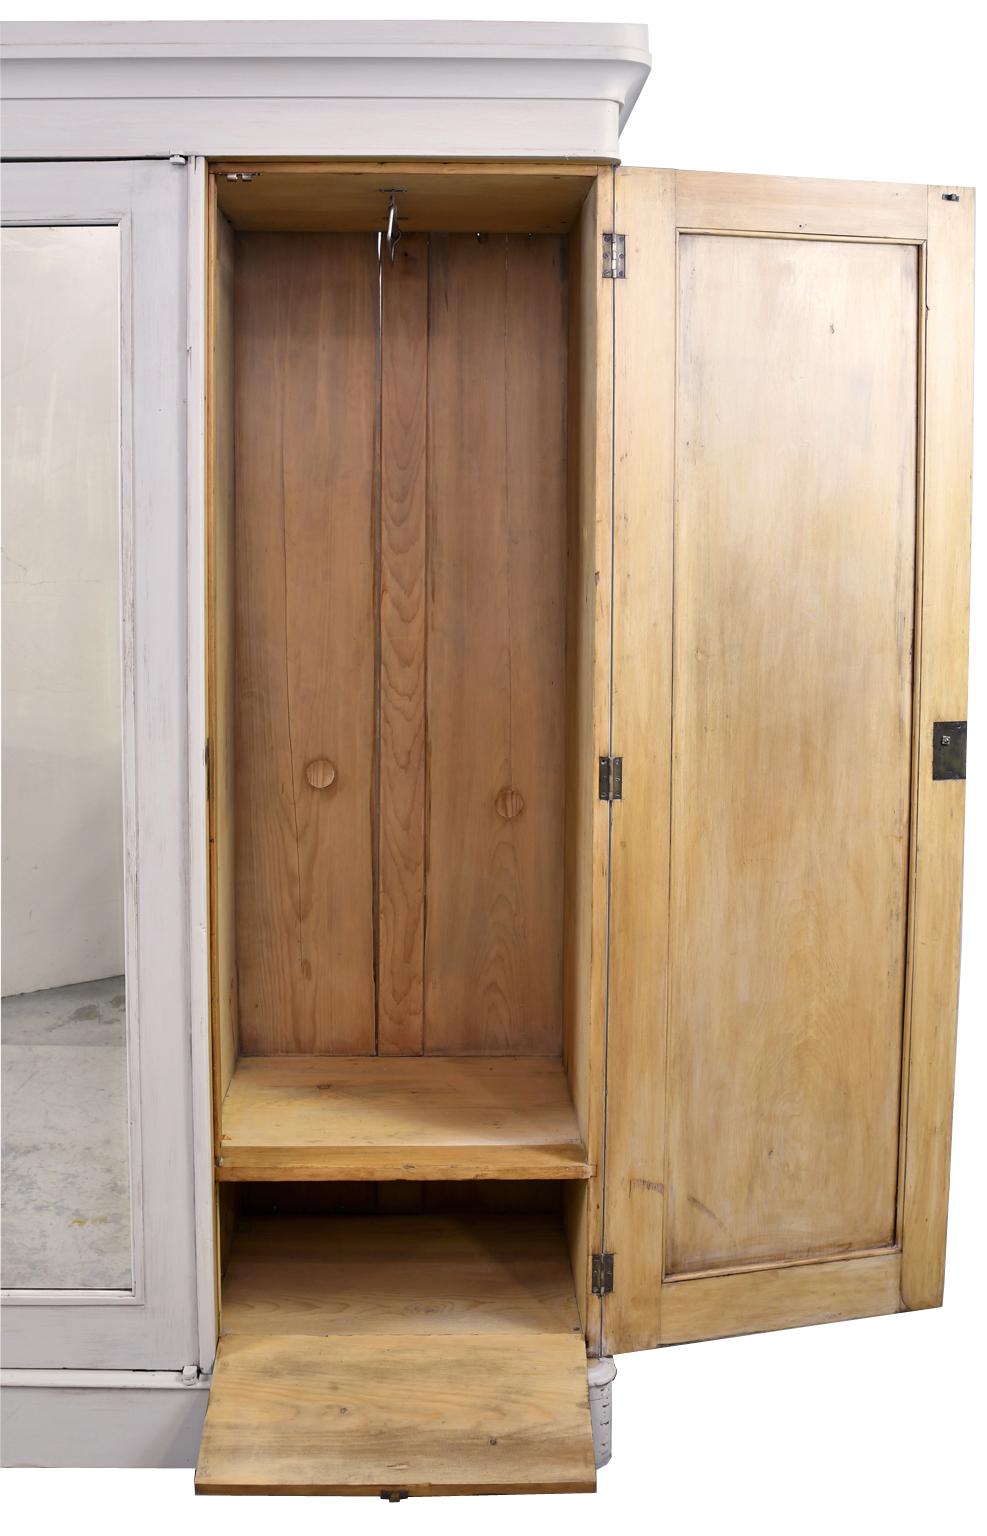 Early 20th Century English Edwardian Pine Wardrobe in Painted Limed Finish with Interior Drawers